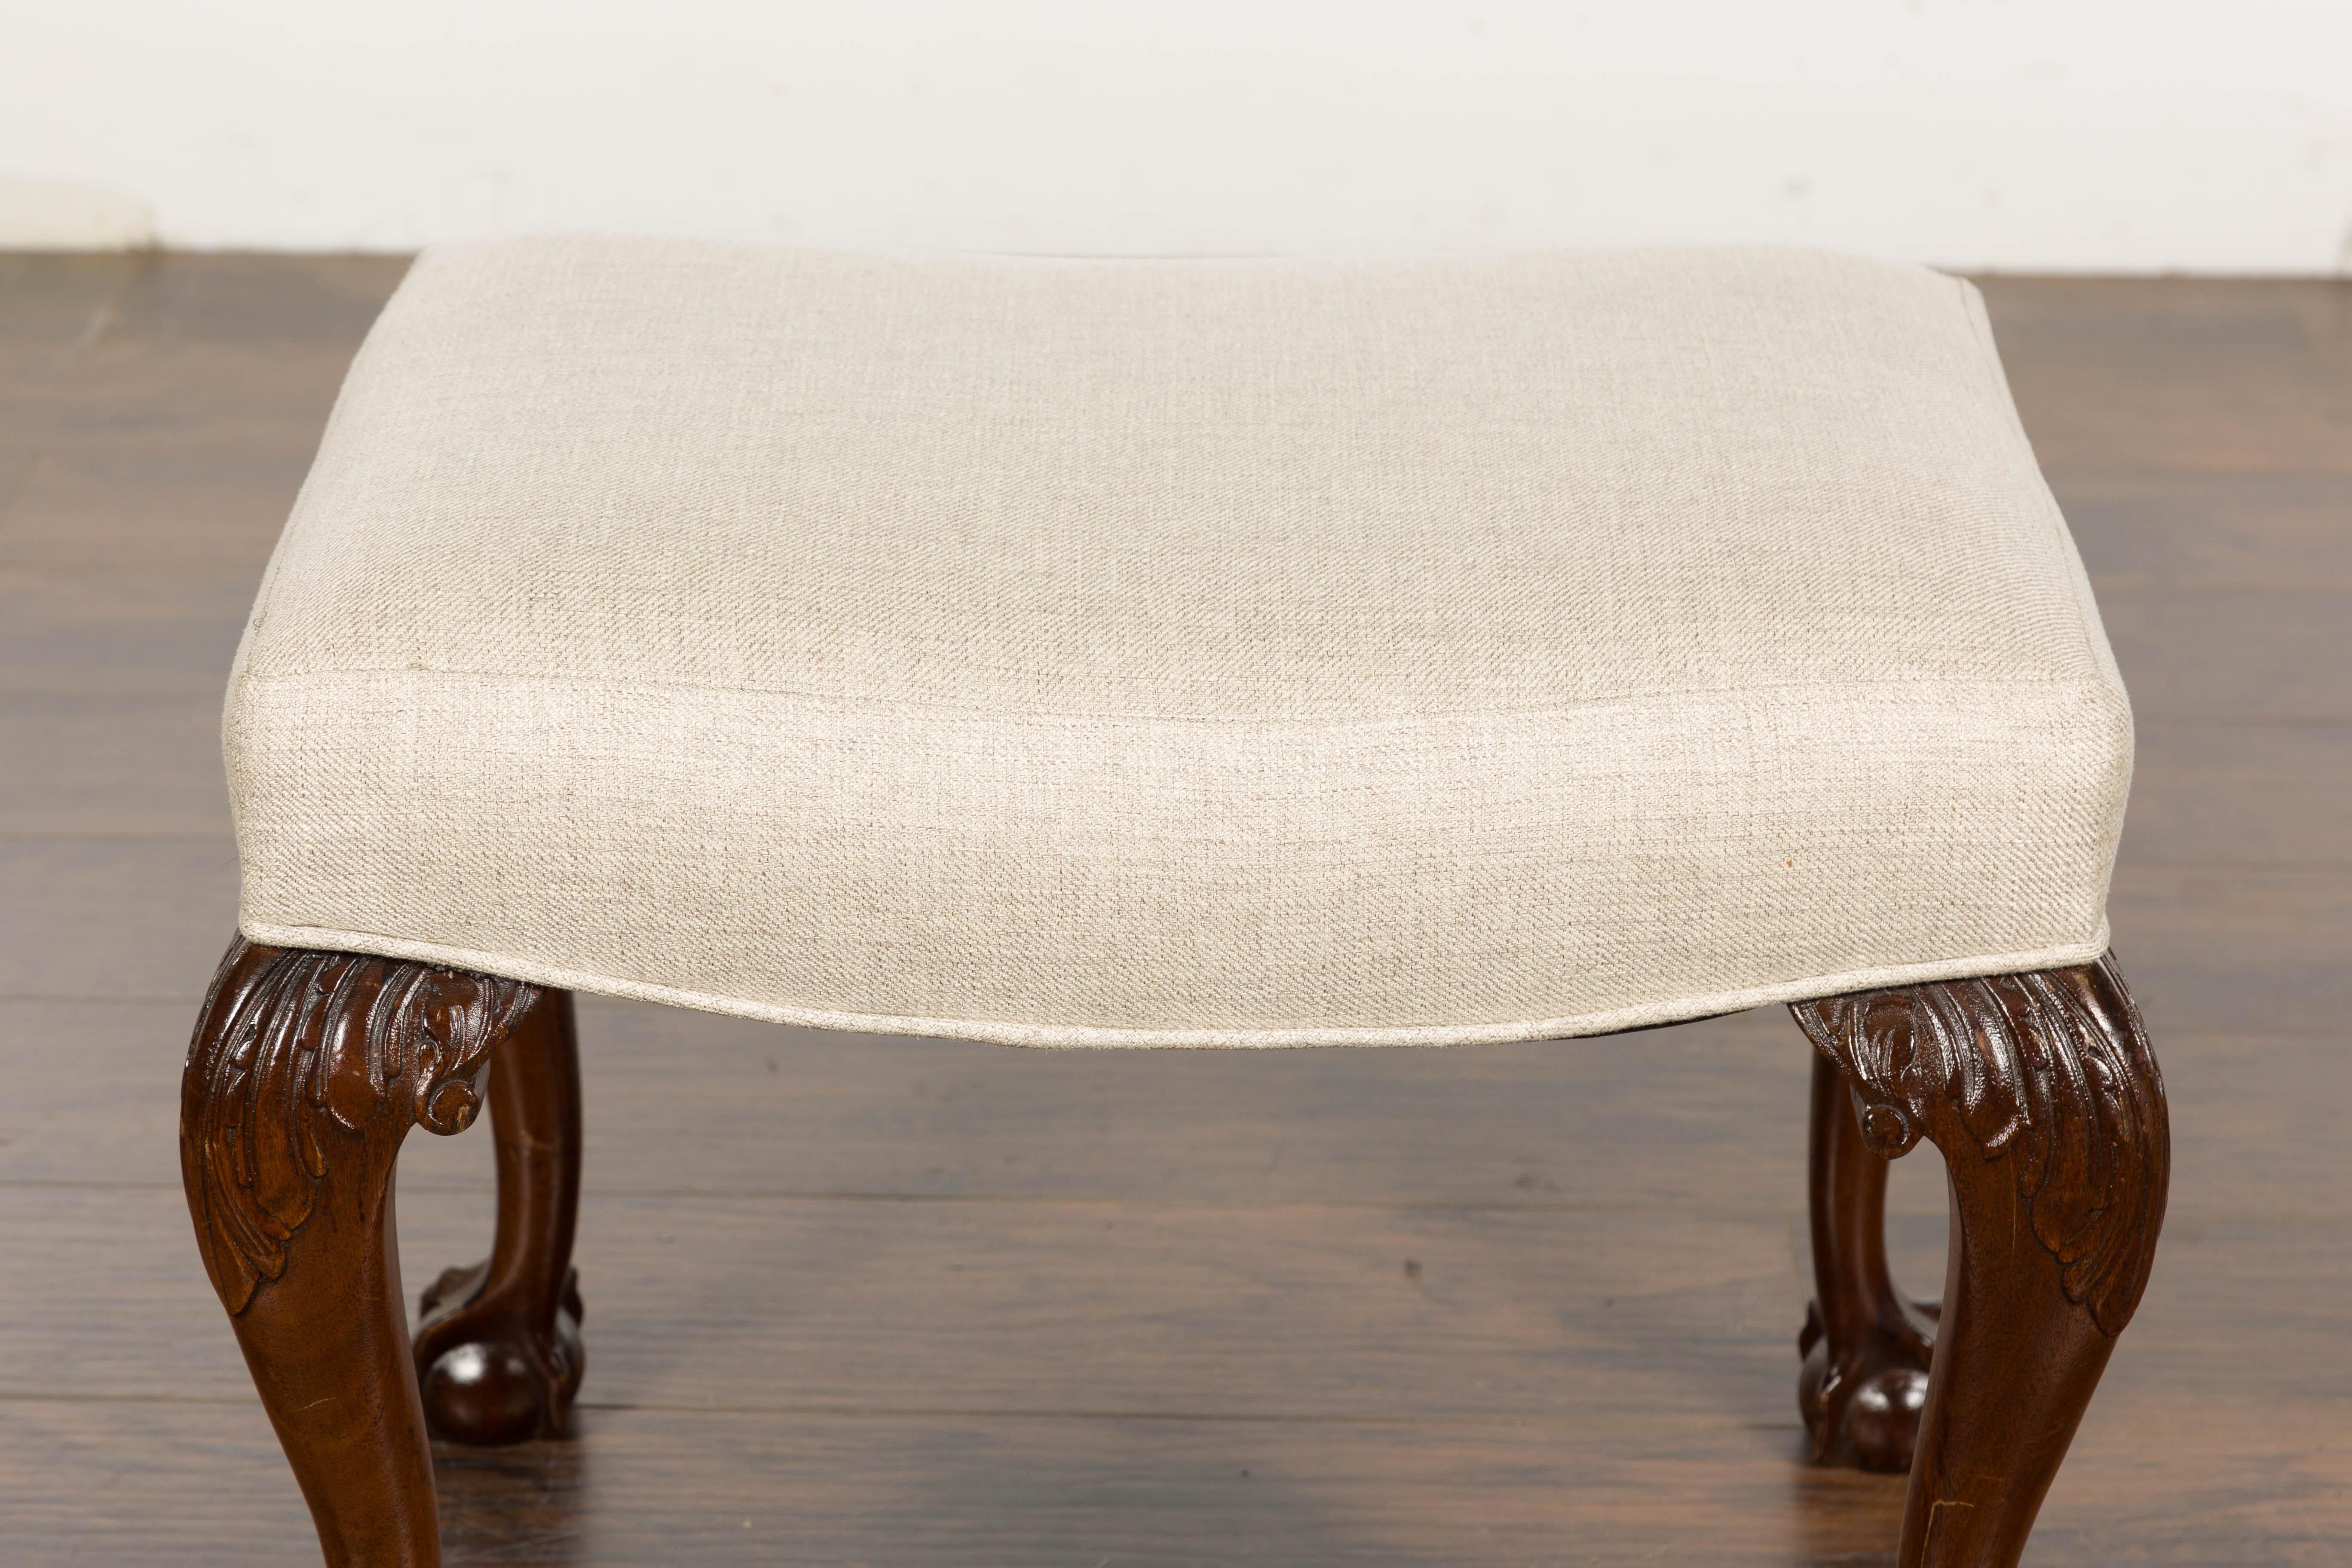 Upholstery 19th Century English Mahogany Upholstered Stool with Cabriole Legs For Sale